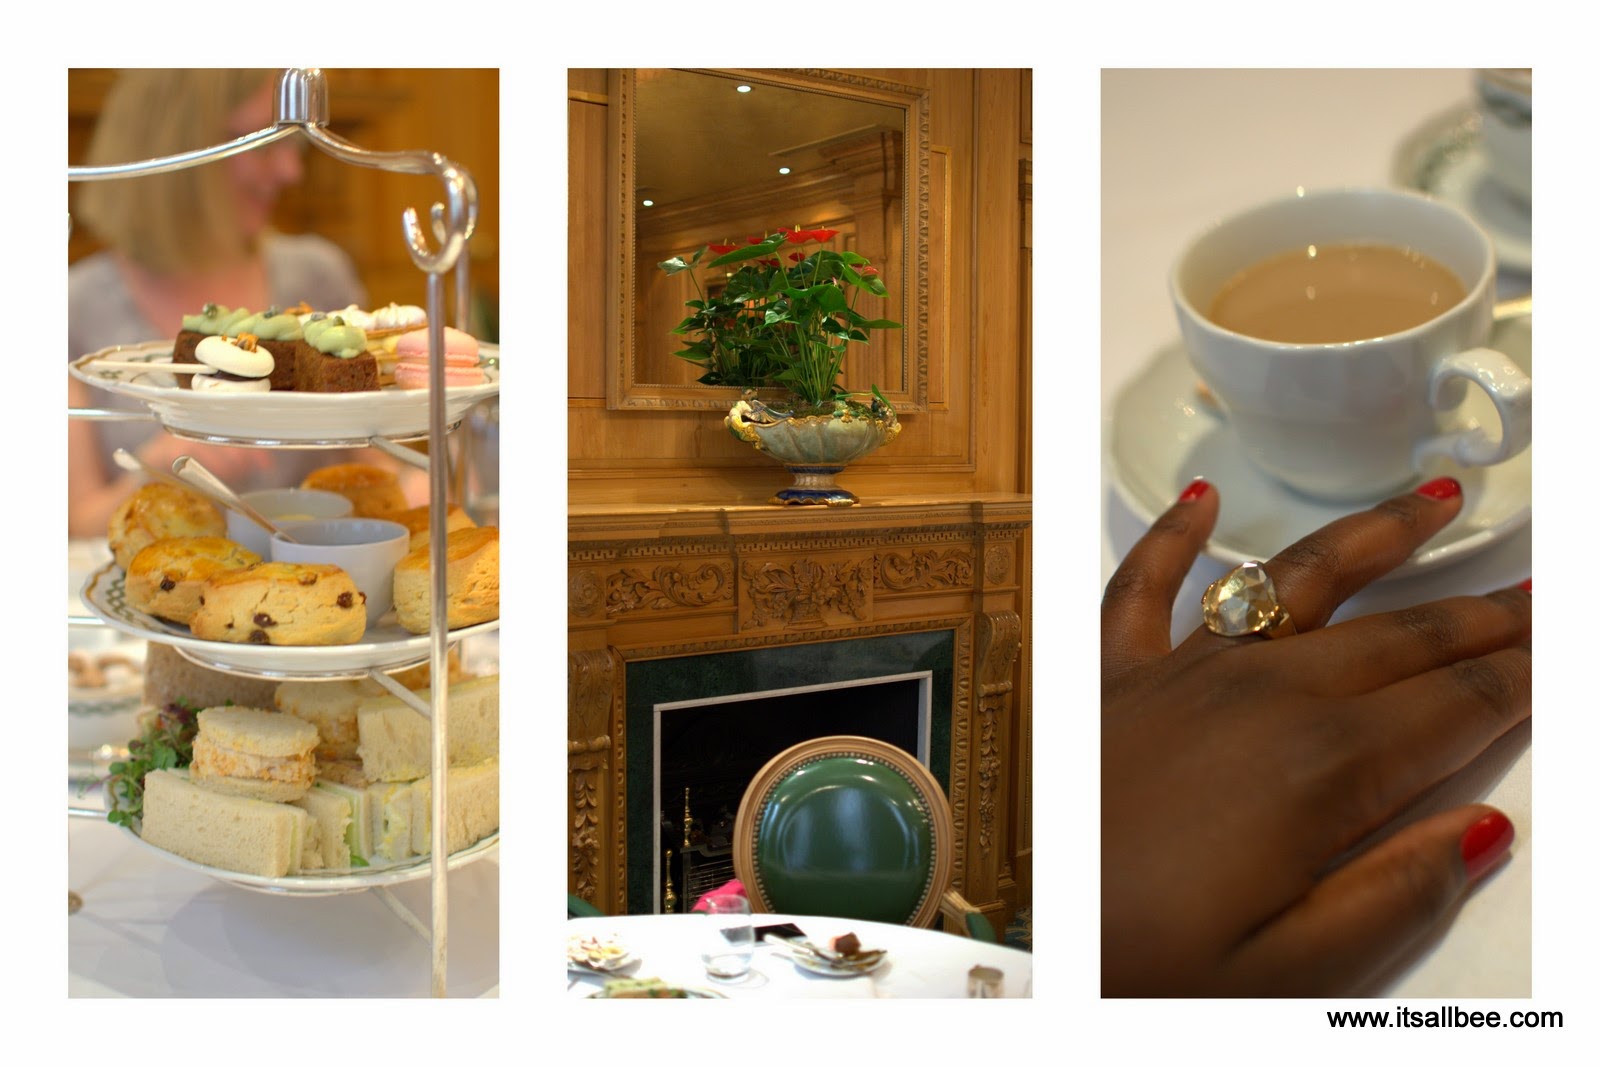 Affordable afternoon tea in london - Top 10 deliciously cheap afternoon tea in London that will not break the bank! From afternoon tea on a boat where you cruise and see London sights to the tasty delights you can woof down in London's coolest hotel restaurants. #afternoontea #cruise #tips #london #travel #foodie #afternoonoutfits